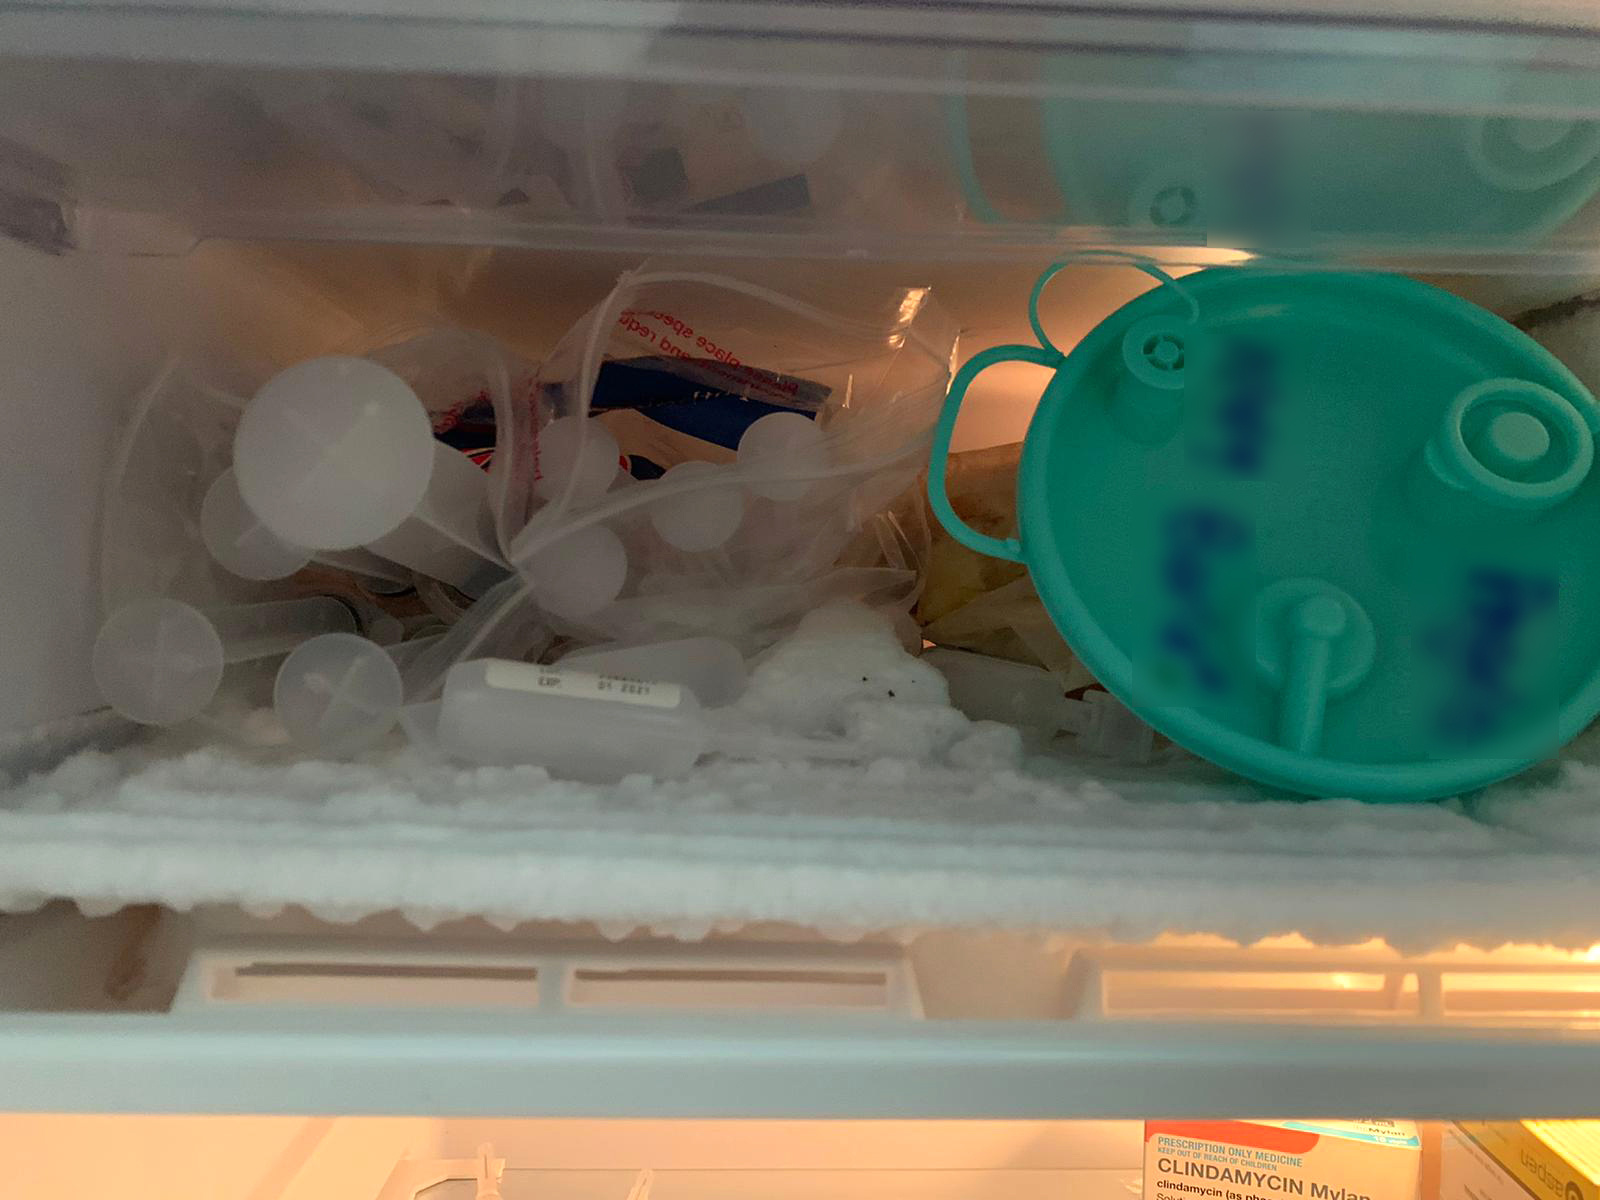 A photo shows syringes in a fridge at a Dr Lanzer clinic.